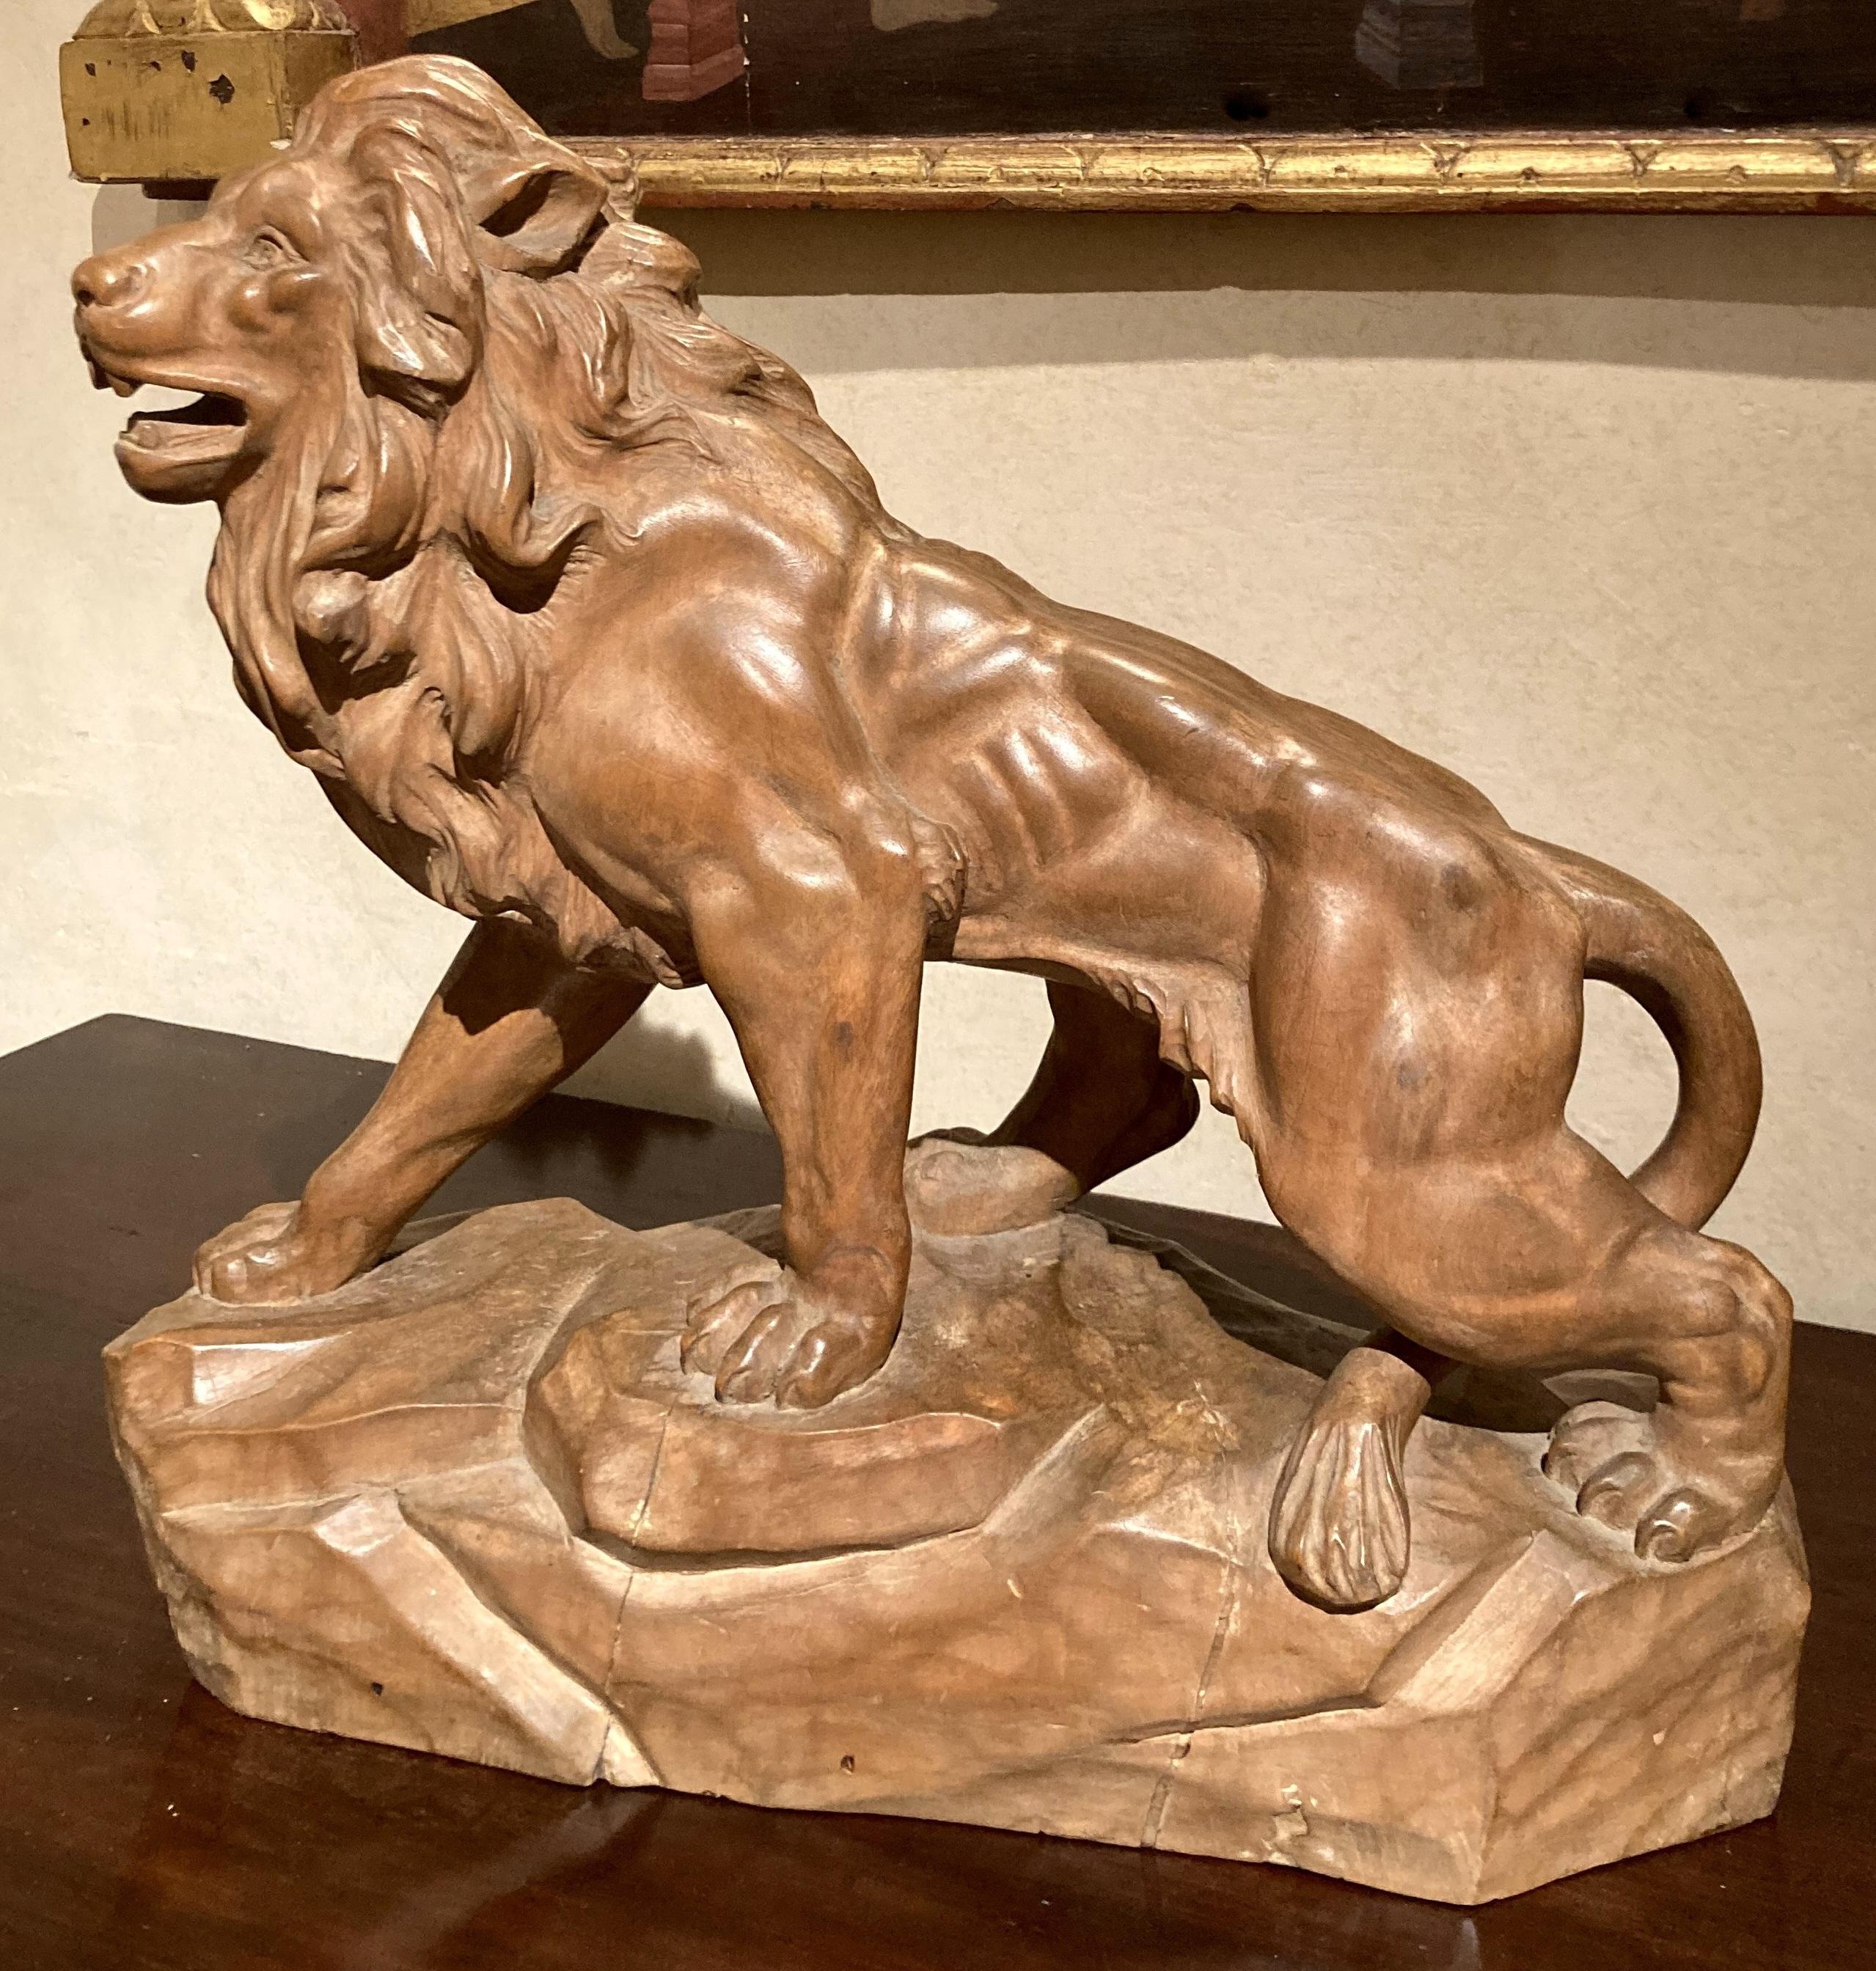 Rustic Italian 19th Century Big Scale Hand Carved Table Top Wood Lion Sculpture For Sale